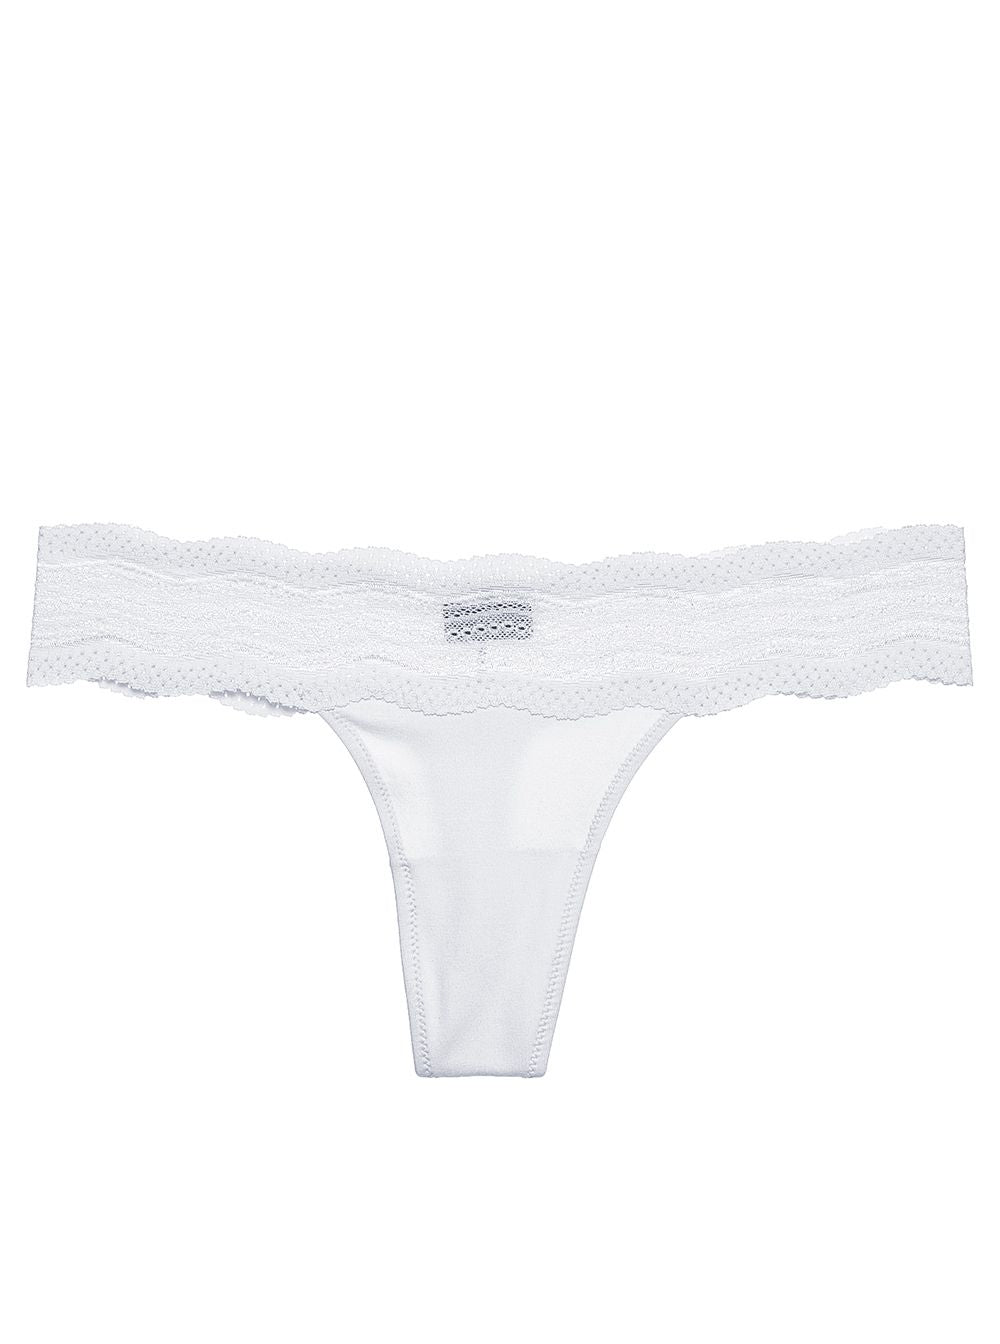 Cosabella Dolce Thong #DOLCE0321BOW